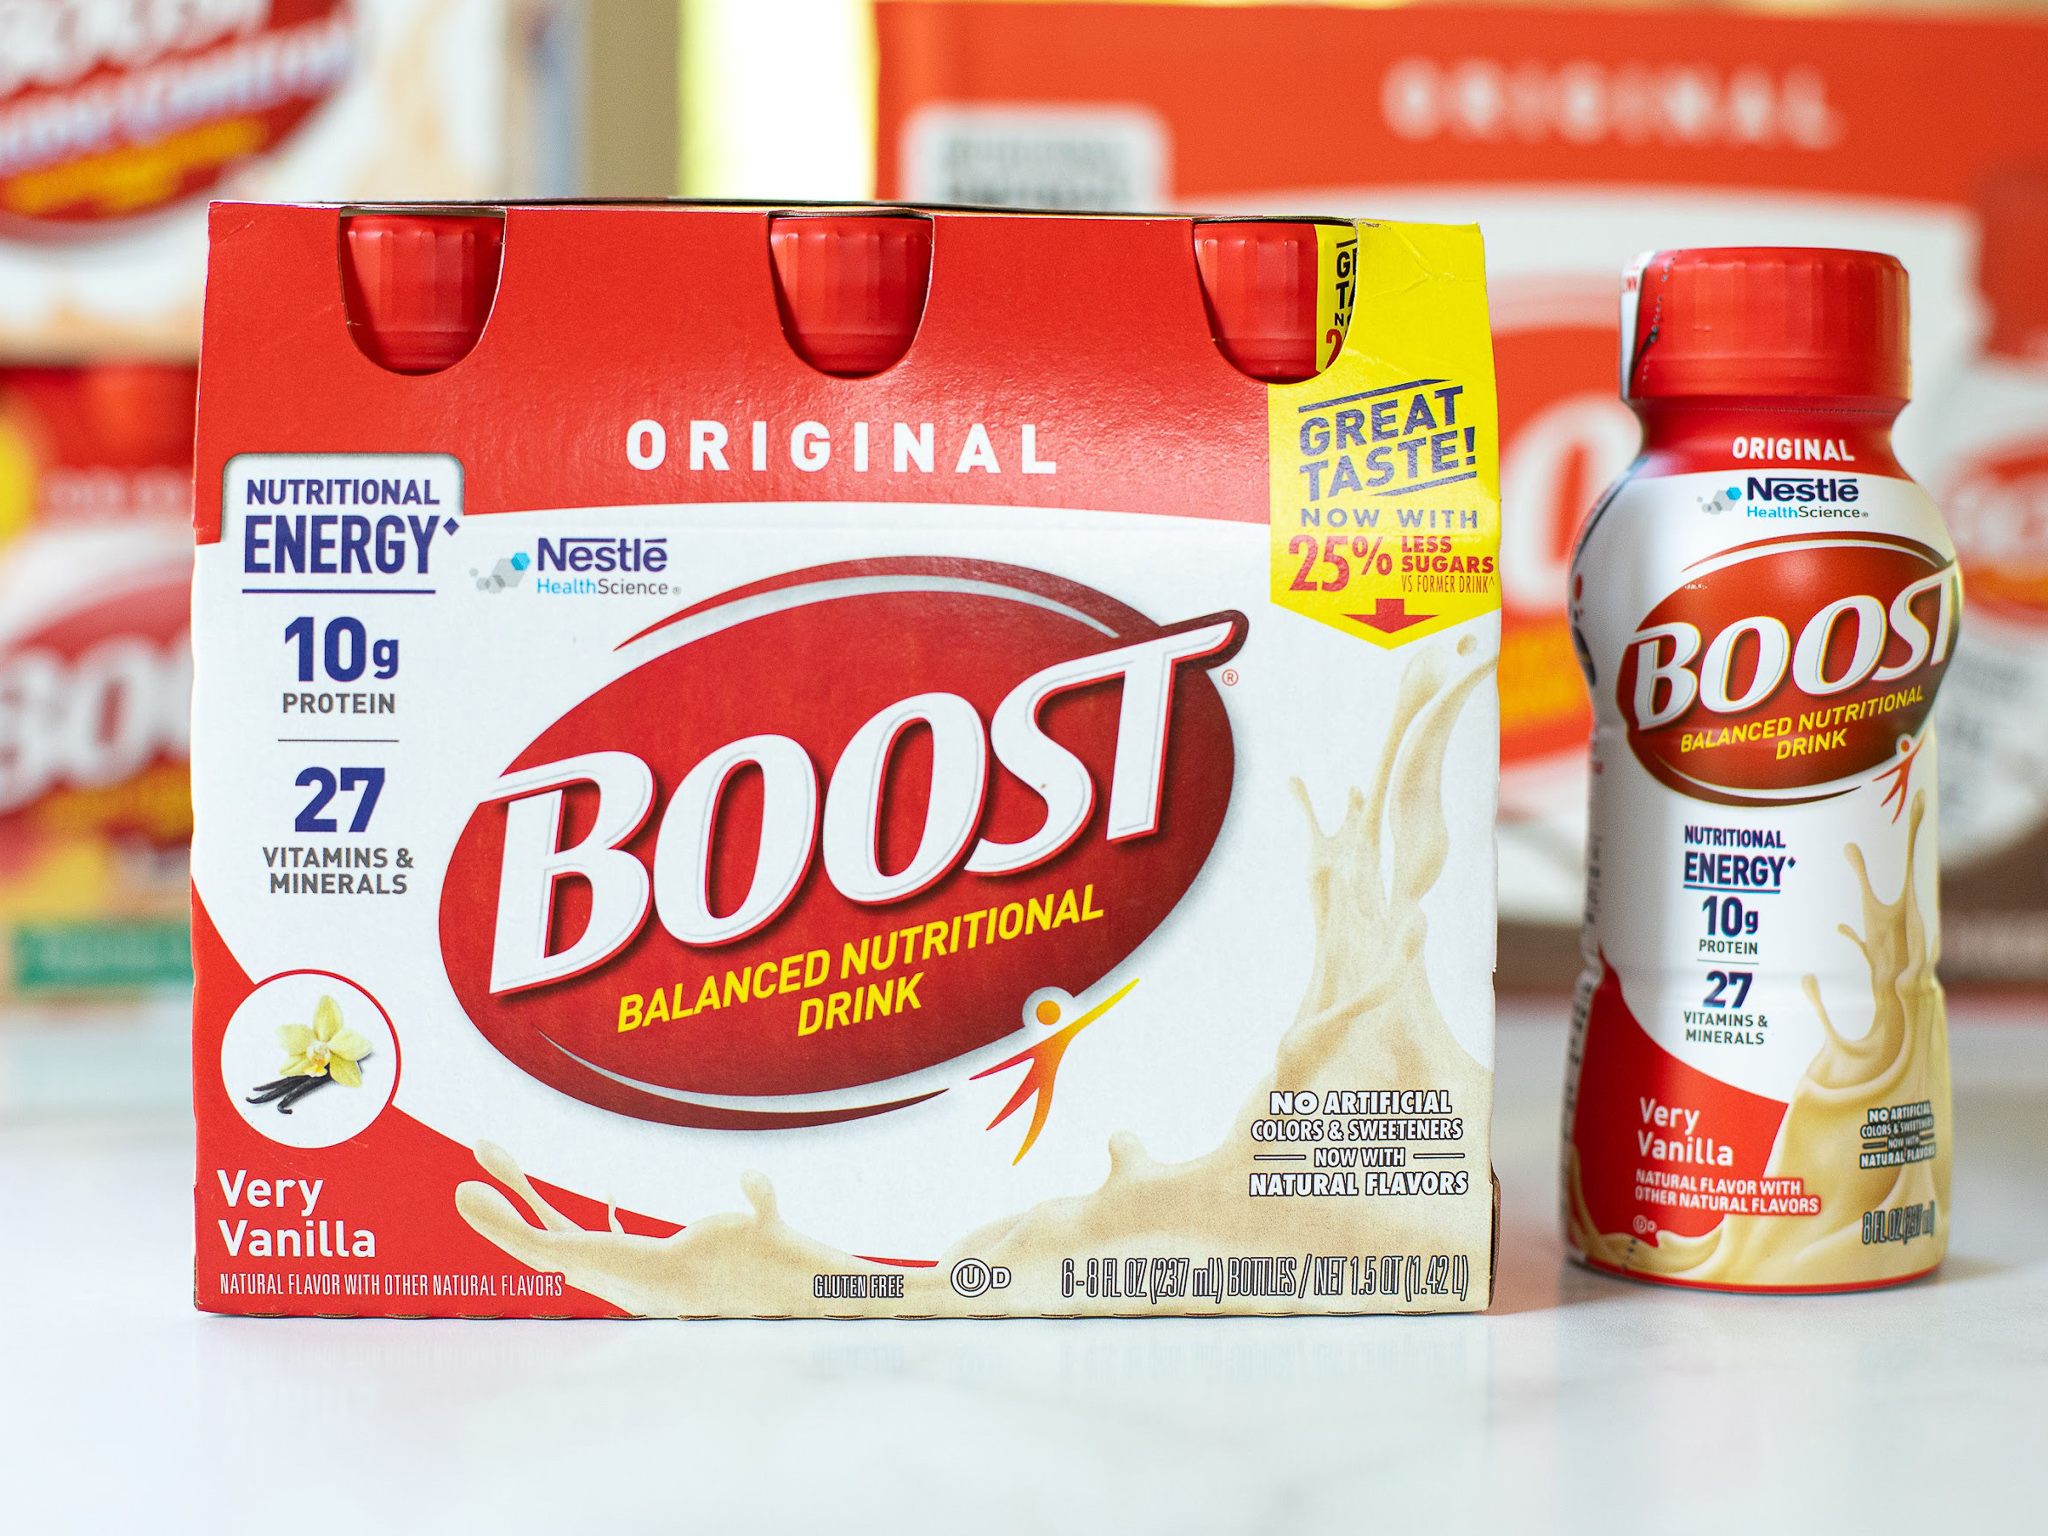 Get Boost Nutritional Drinks For As Low As $6.02 Per Pack At Publix